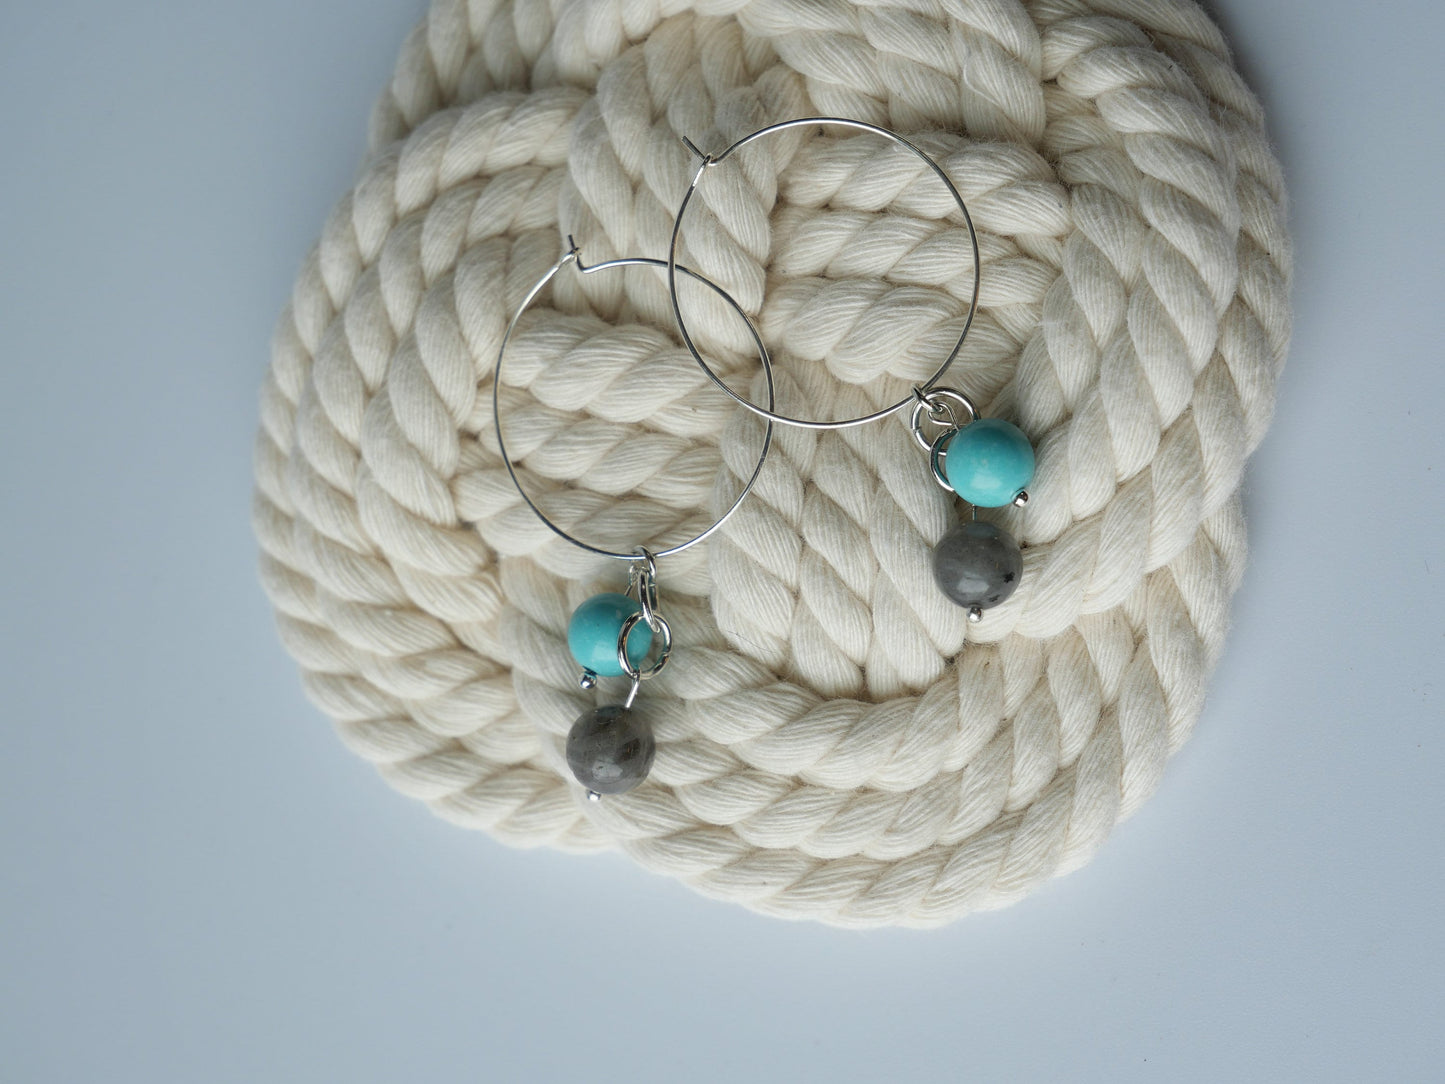 Handmade Maine Hoop Earrings with Turquoise-Toned Stone and Labradorite | Spooky Vibes